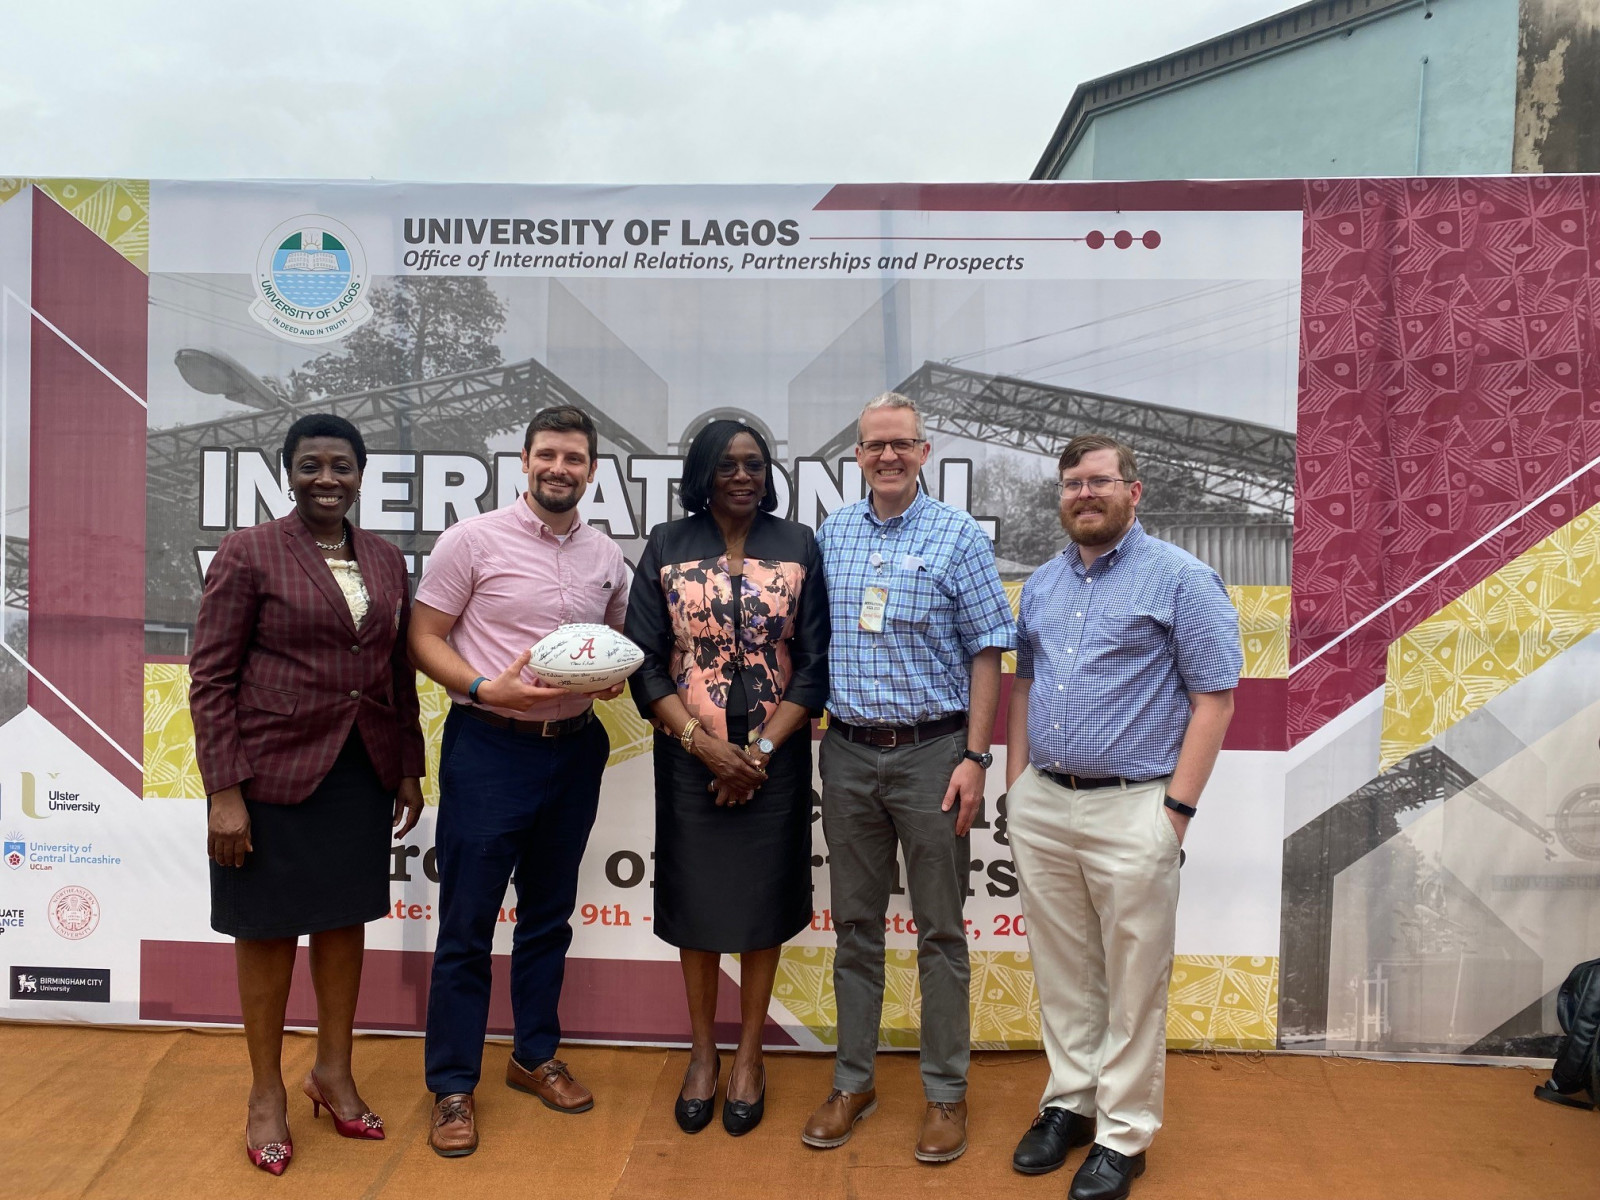 5 people in front of a University of Lagos graphic, one holding a football